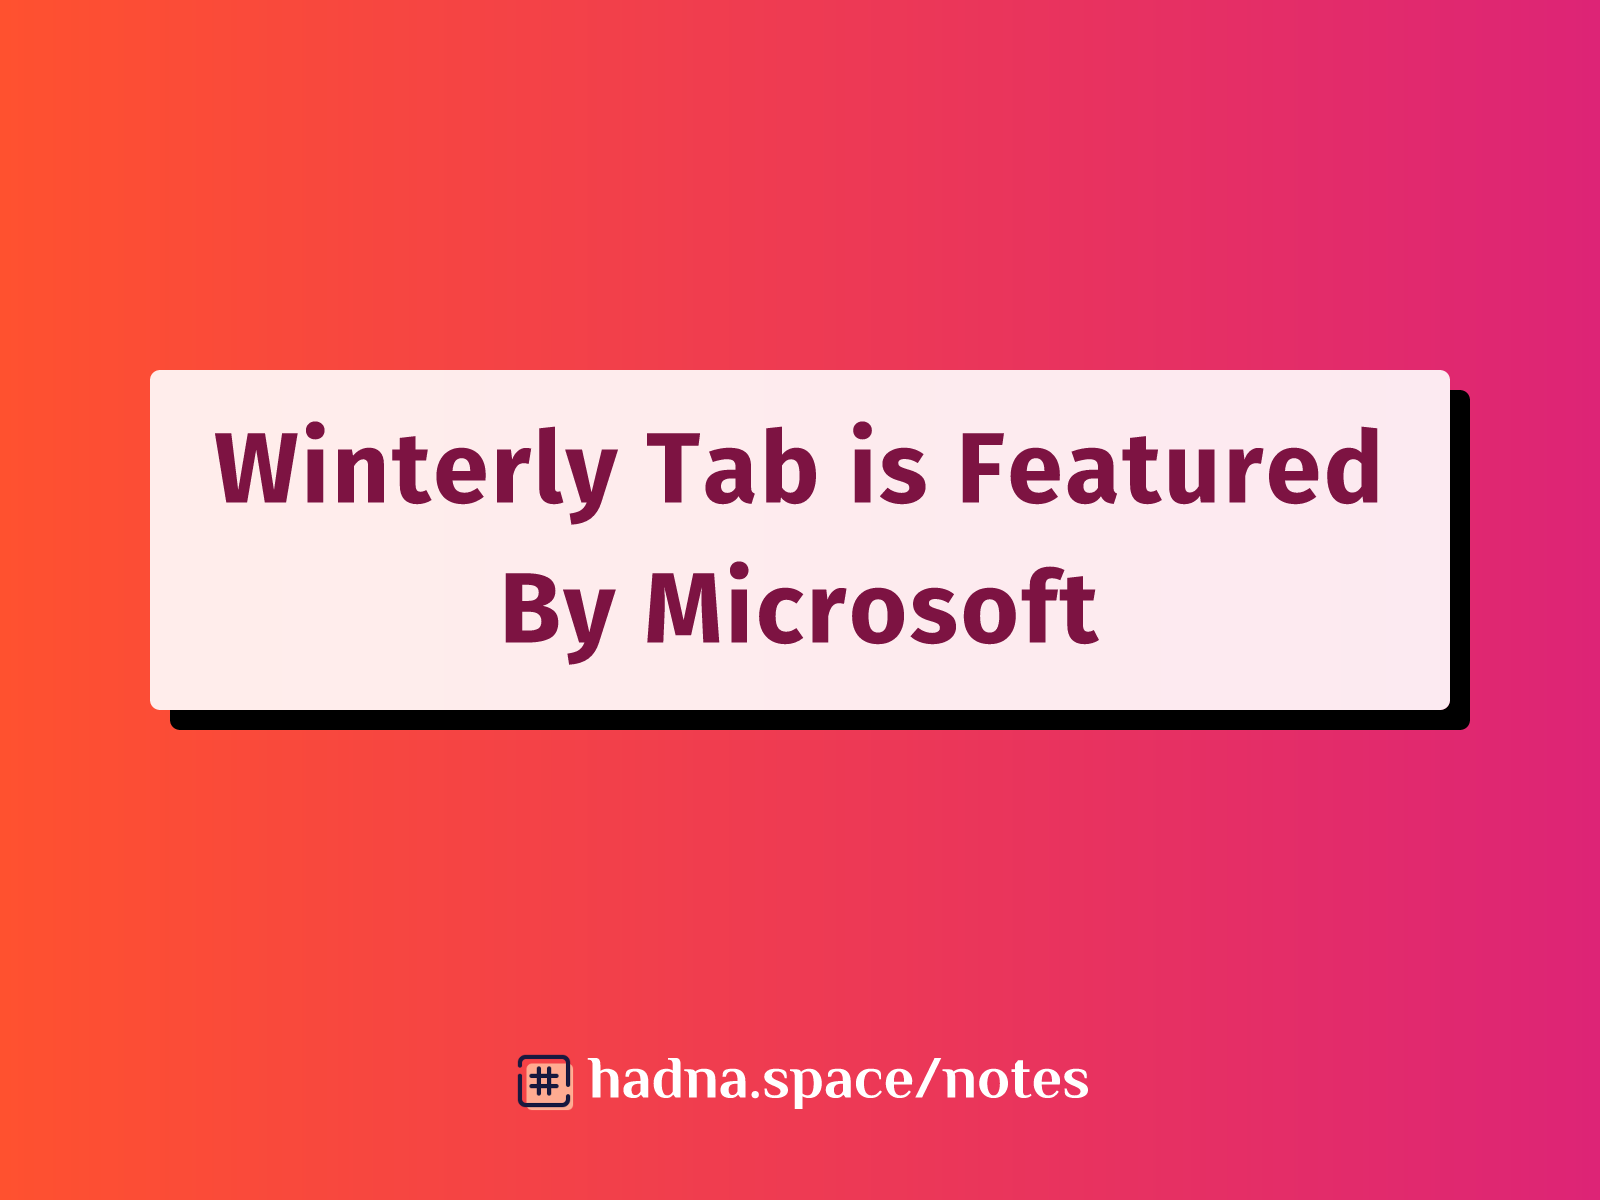 Winterly Tab is Featured By Microsoft!